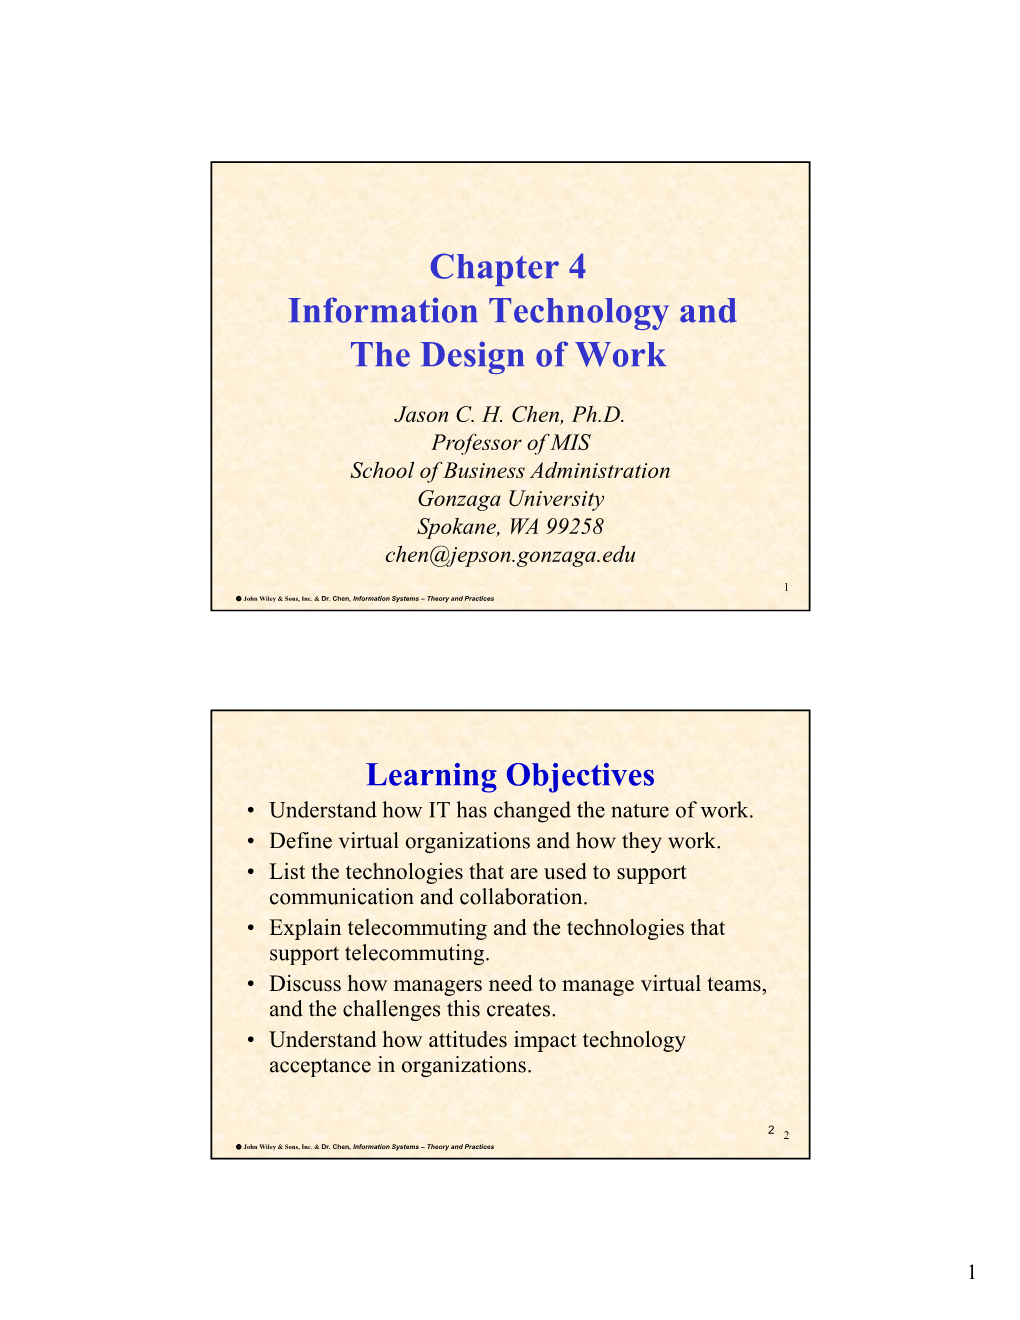 Chapter 4 Information Technology and the Design of Work